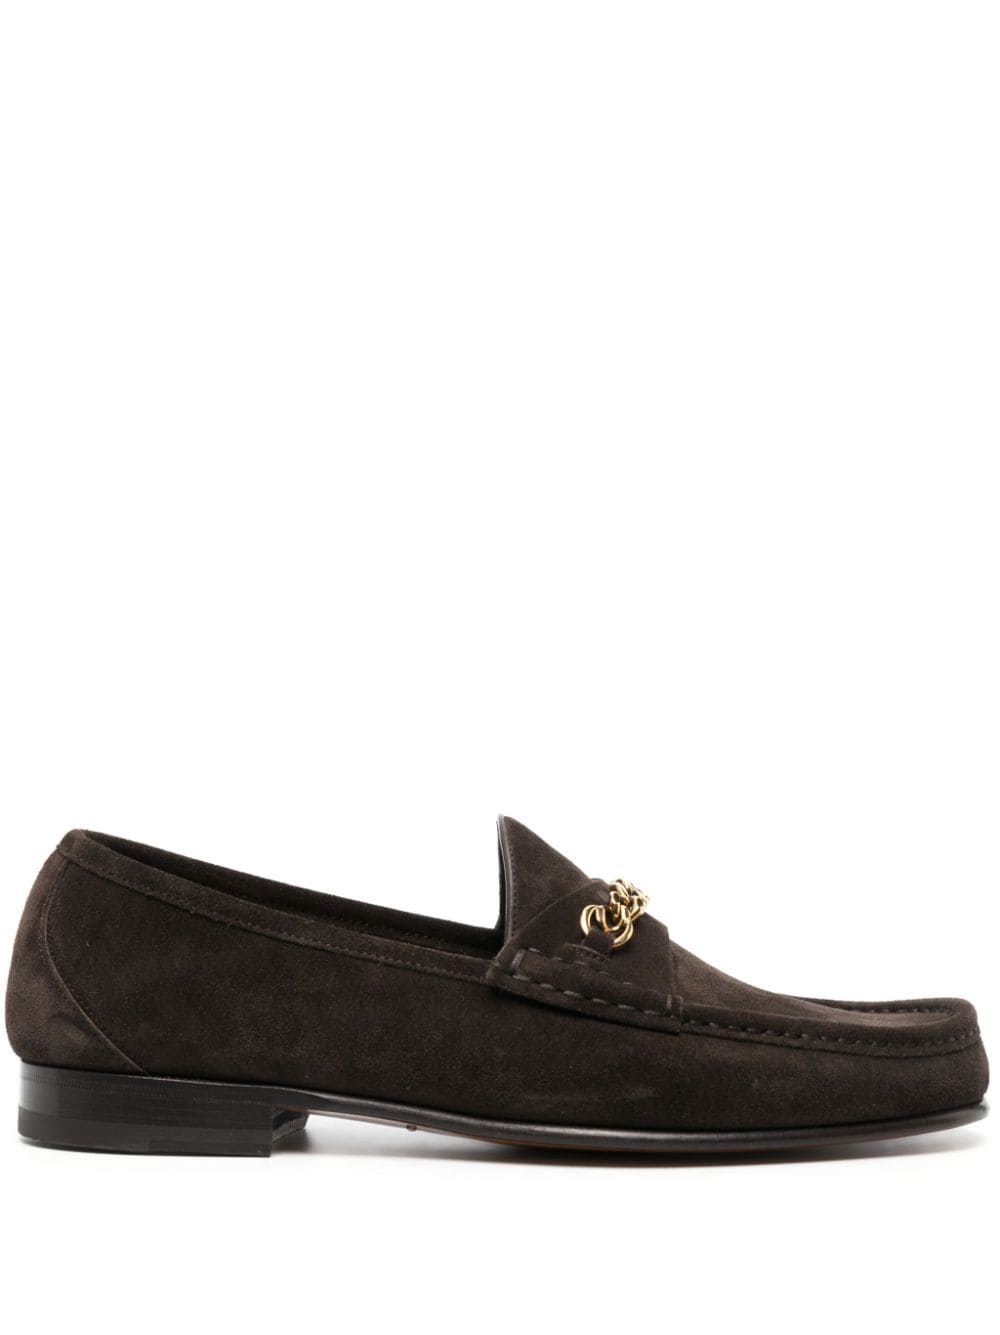 TOM FORD chain suede loafers - Brown von TOM FORD